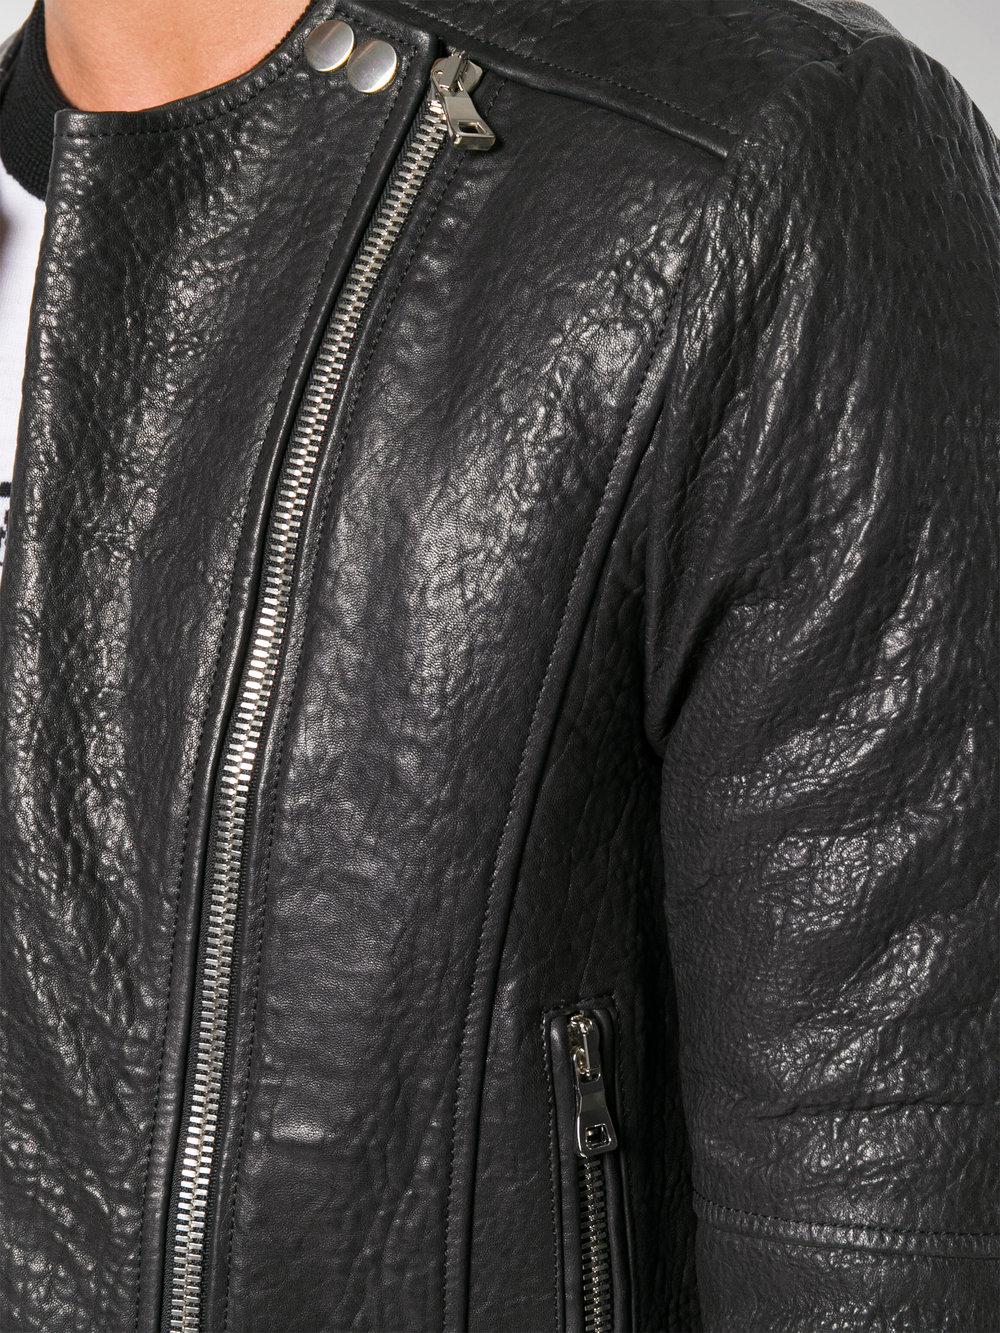 Balmain Bubble Leather Jacket in for | Lyst